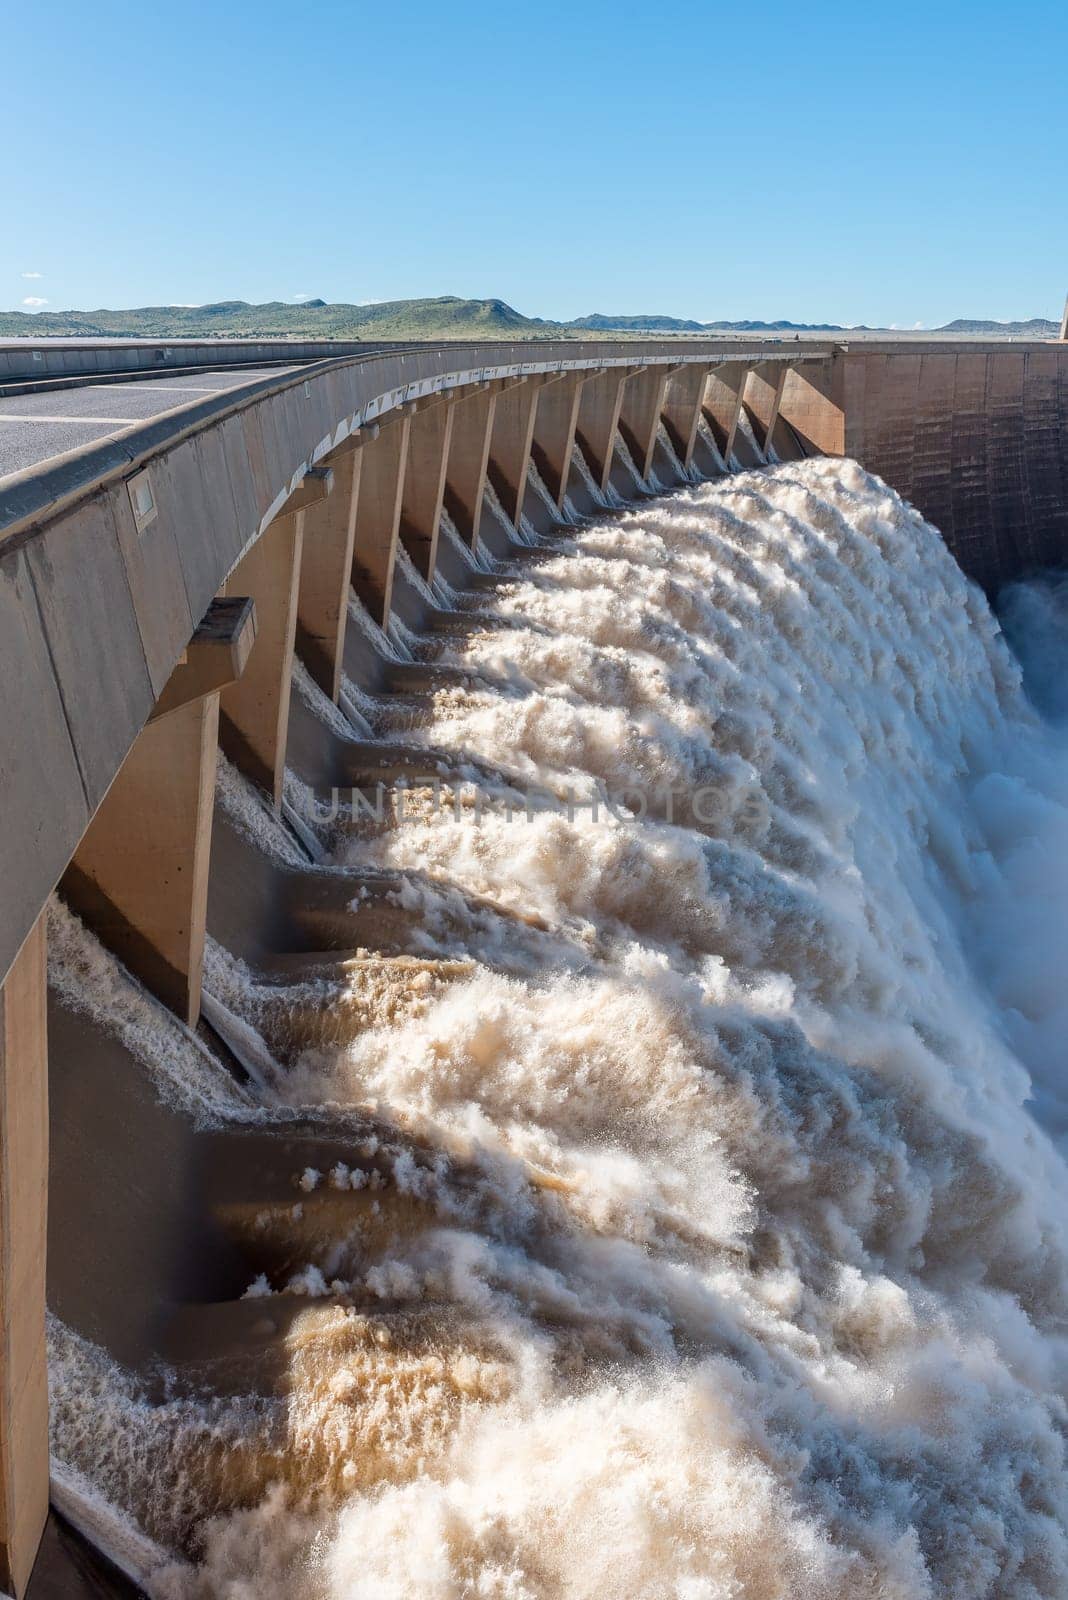 The largest dam in South Africa, the Gariep Dam, overflowing by dpreezg